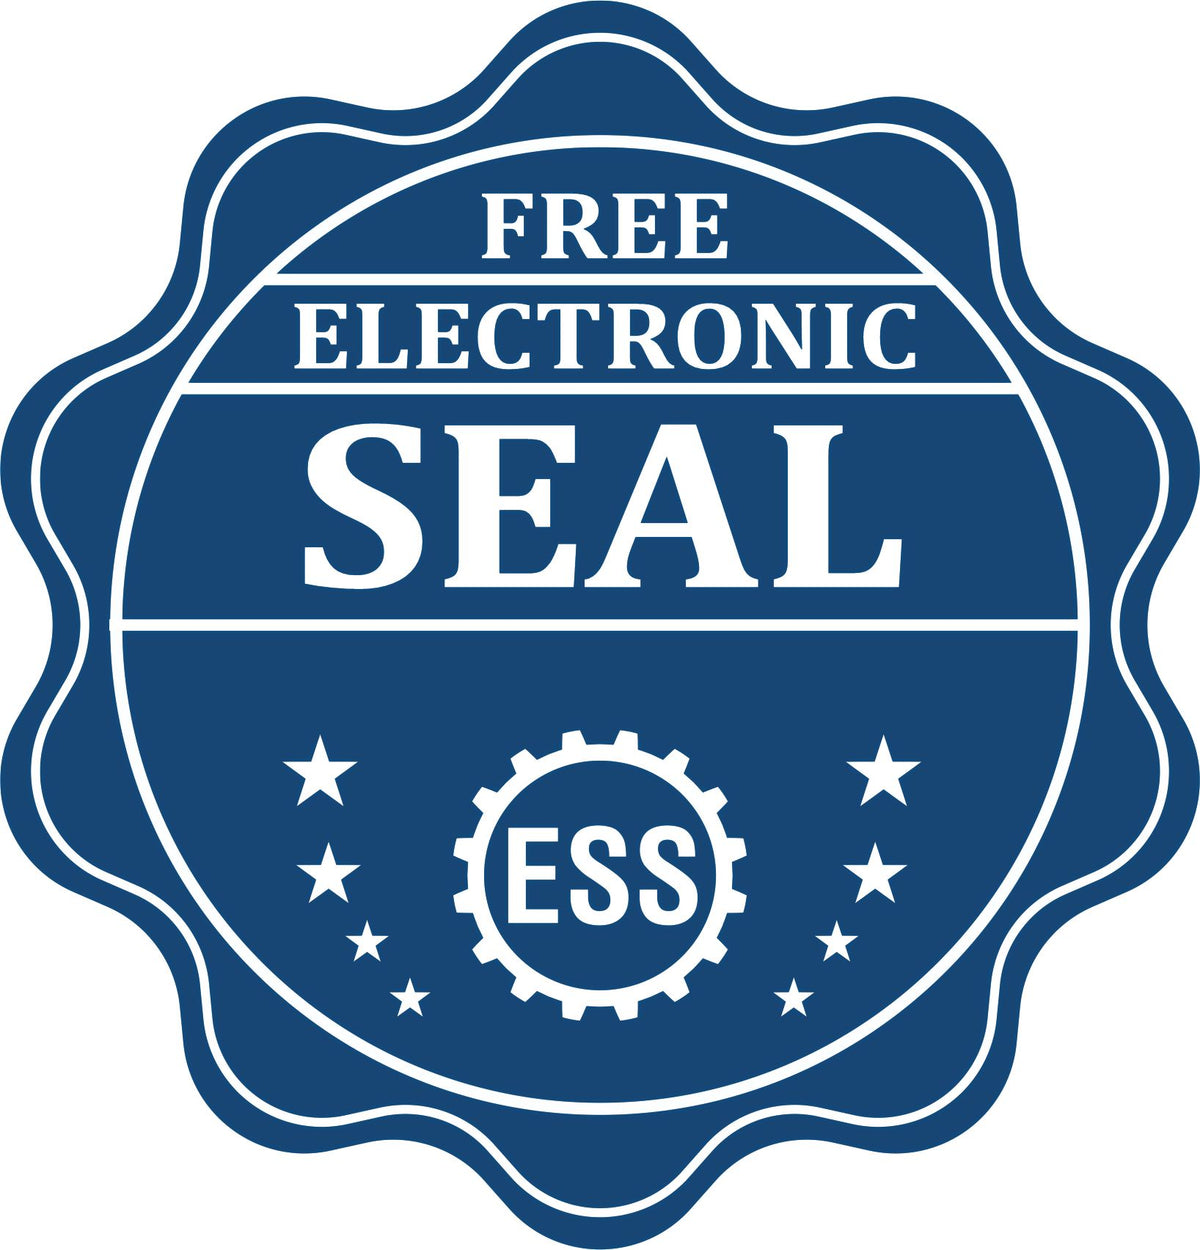 A badge showing a free electronic seal for the Hybrid Mississippi Land Surveyor Seal with stars and the ESS gear on the emblem.